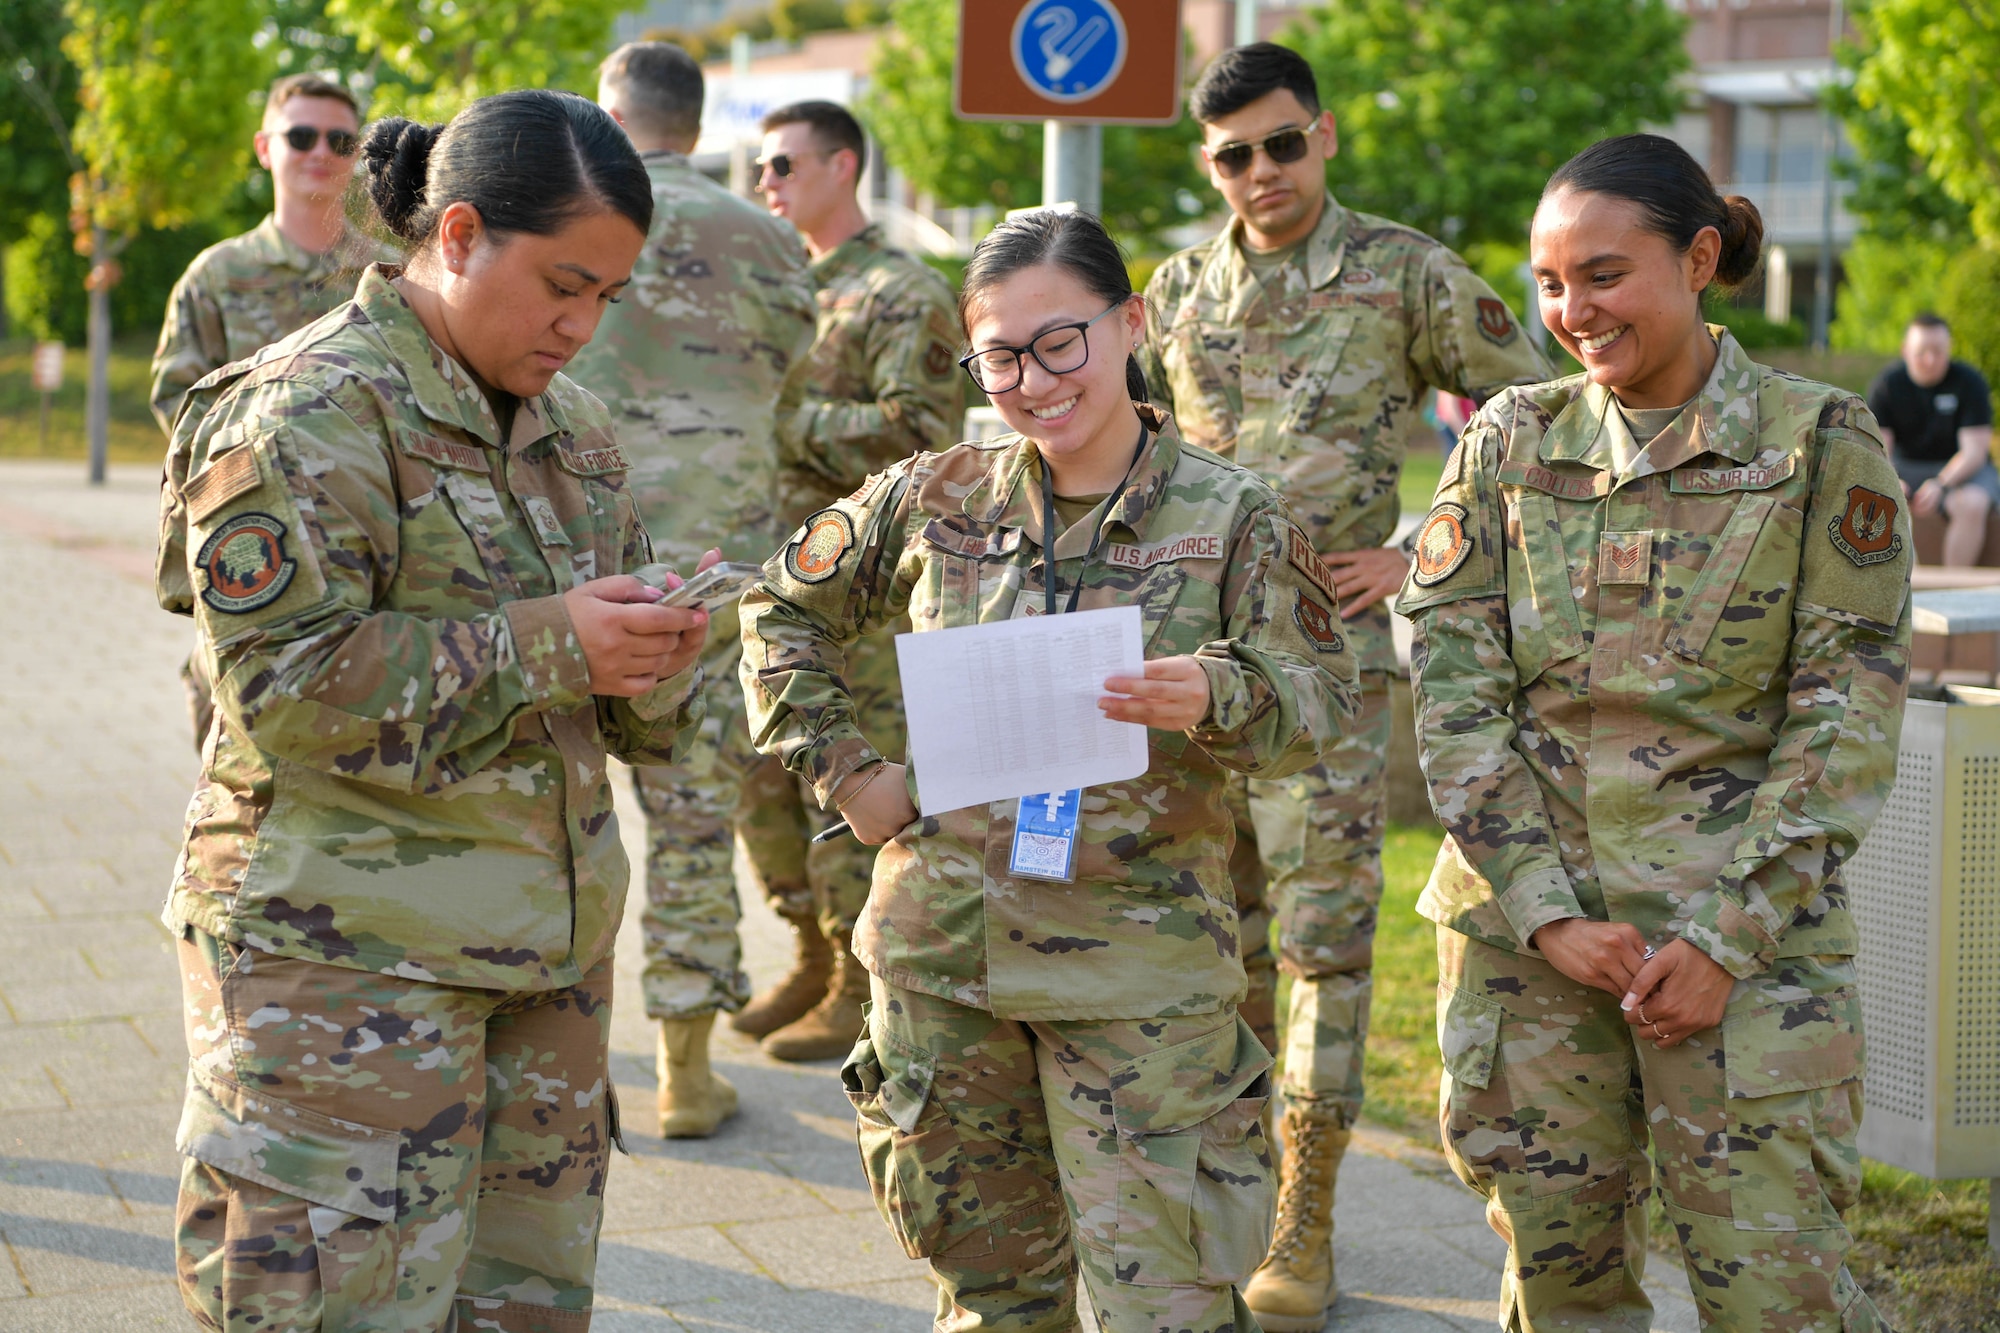 The Deployment Transition Center’s team waiting outside the passenger terminal at Ramstein Air Base, Germany, May 3, 2022.